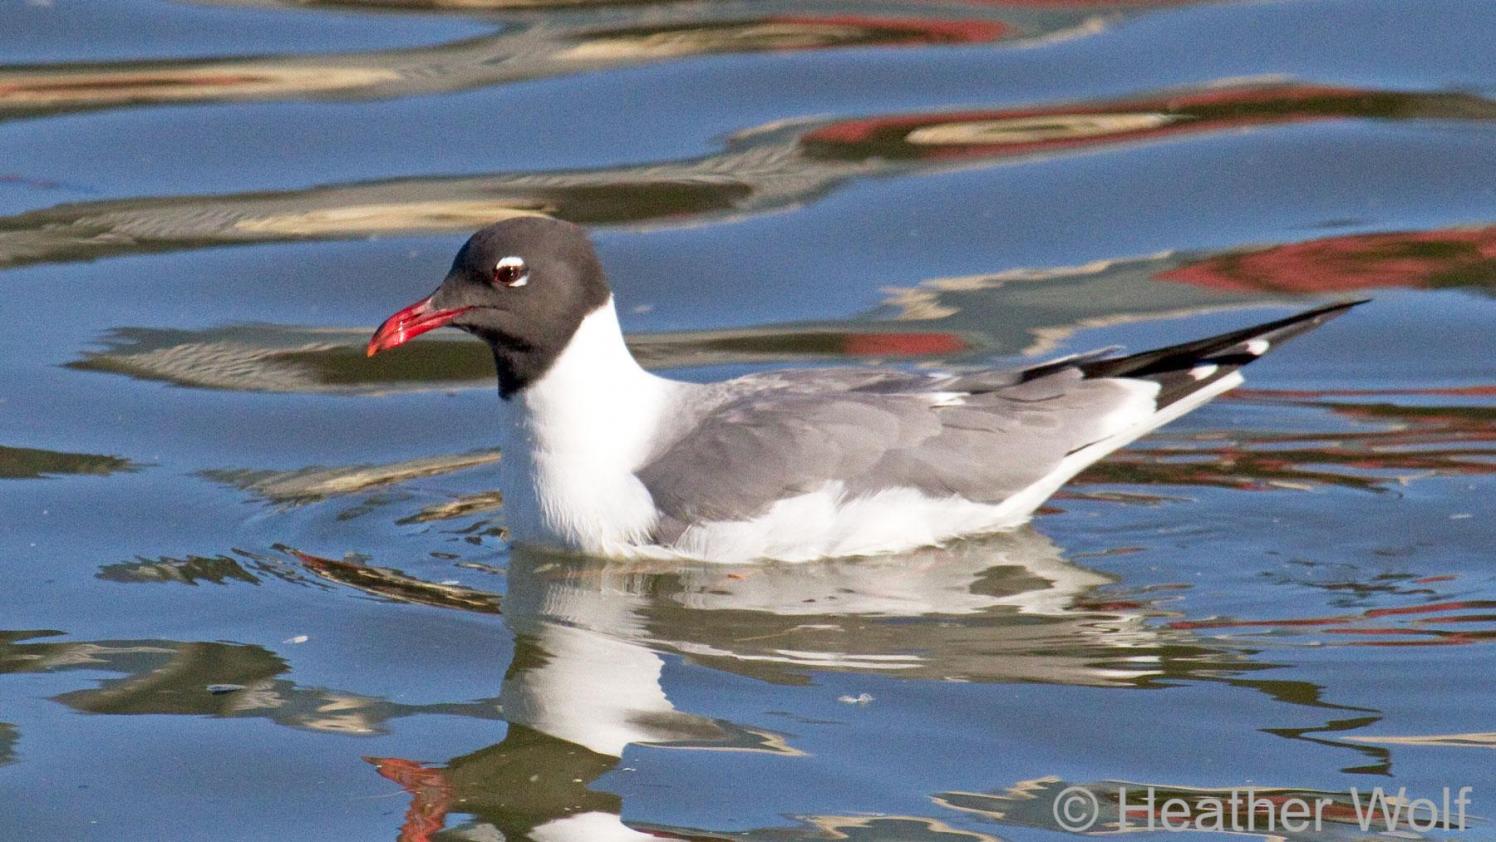 Laughing Gull in the water on a sunny day.